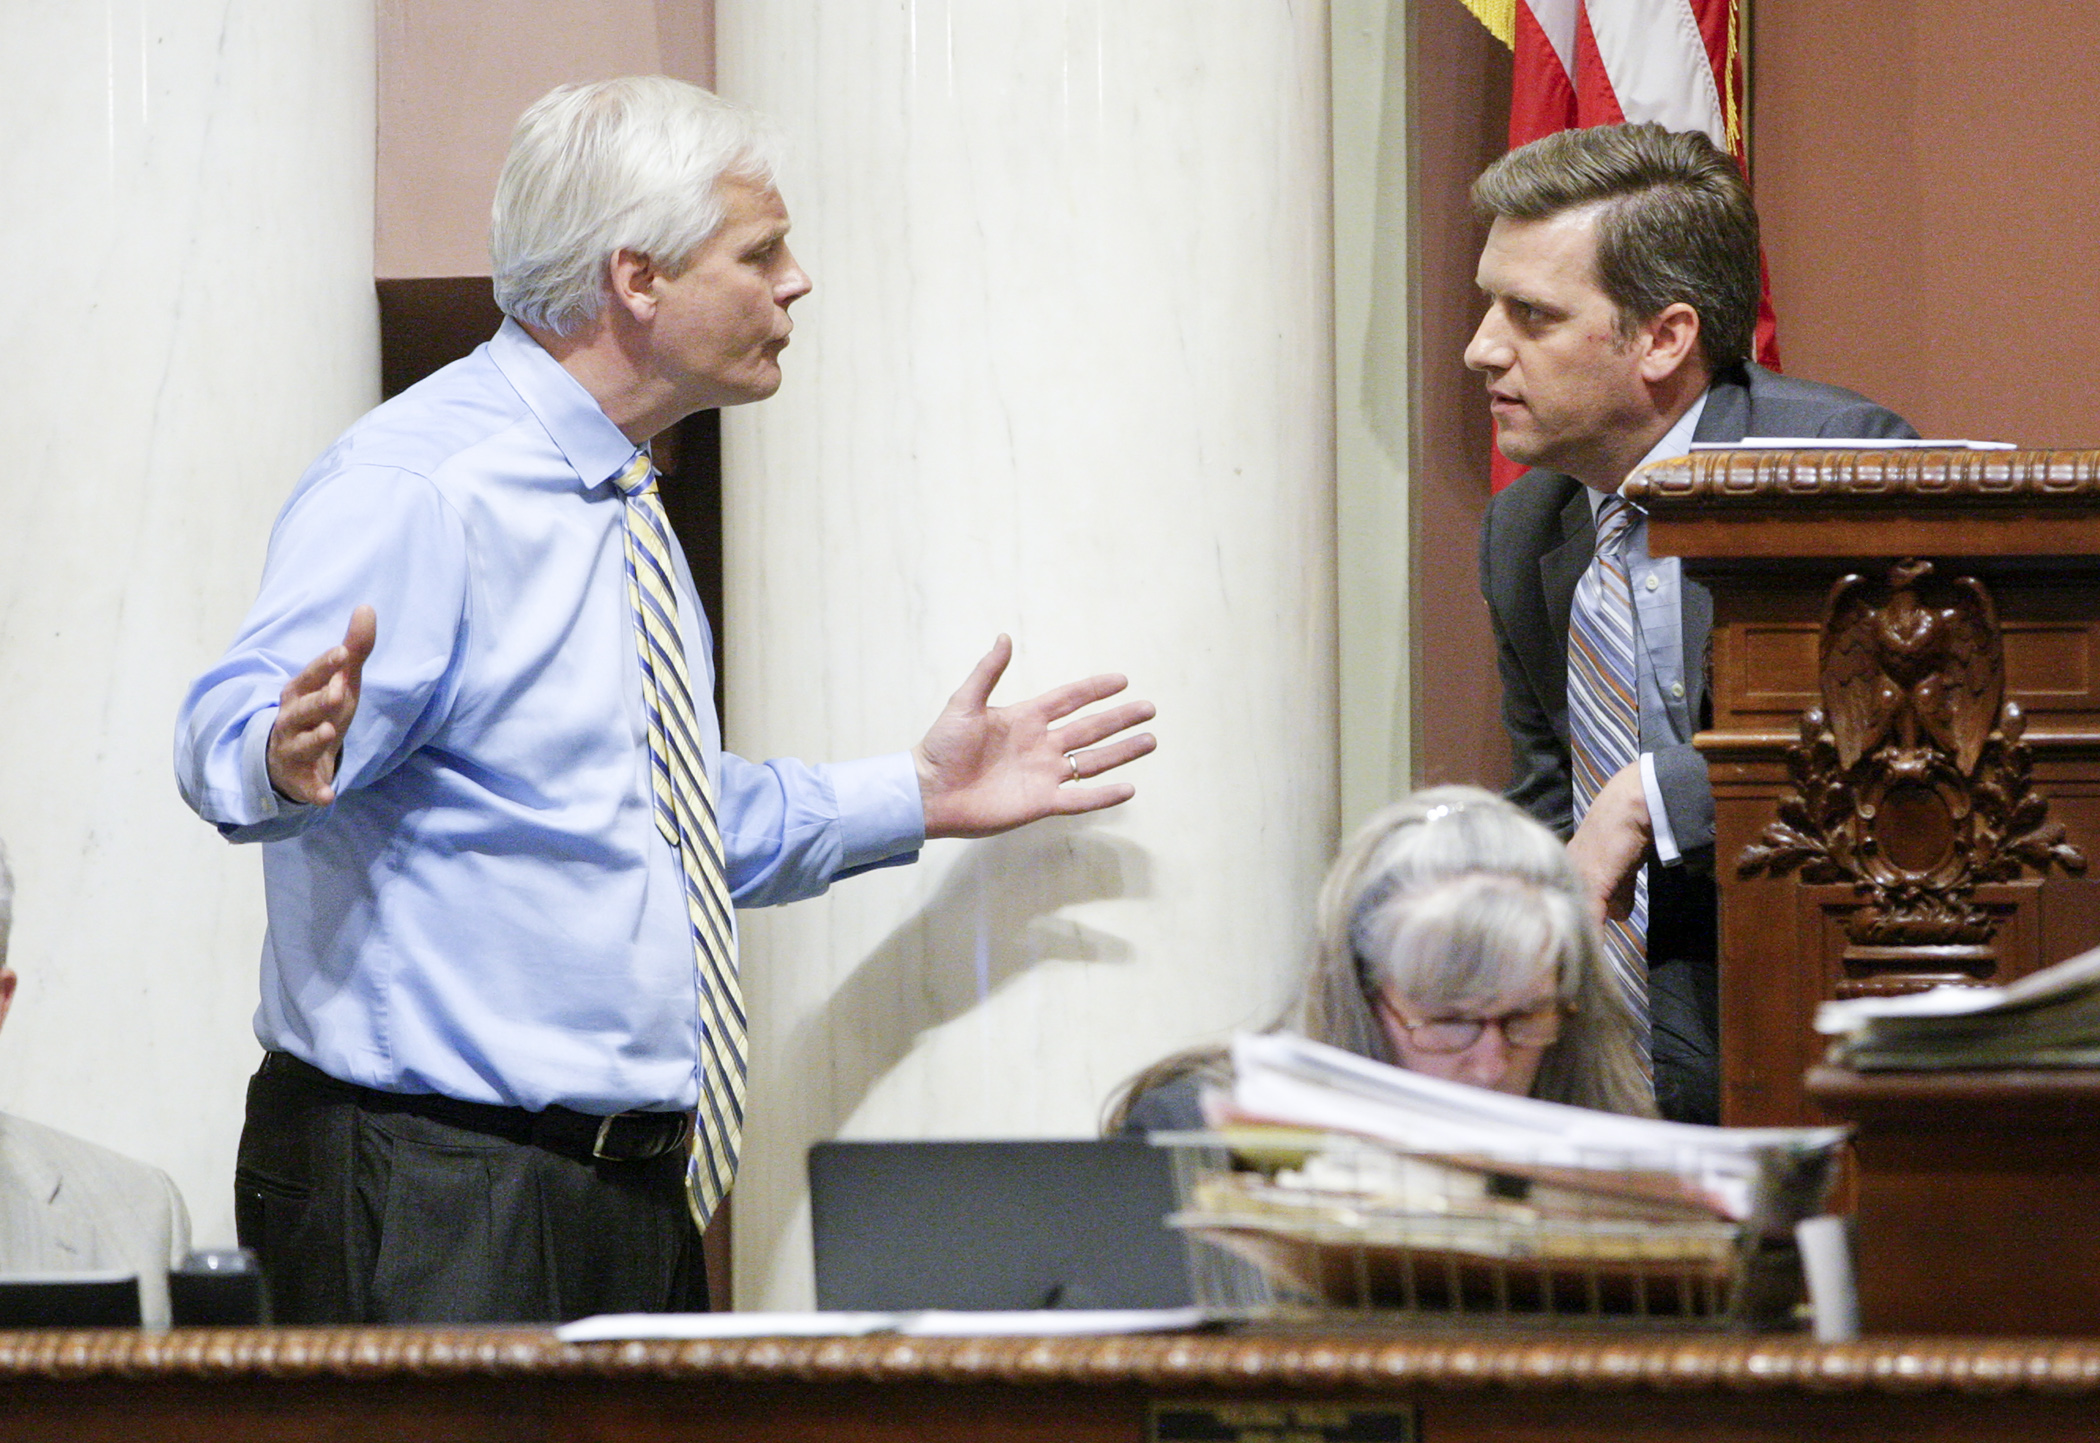 House Minority Leader Paul Thissen, left, and House Speaker Kurt Daudt have a heated discussion during May 22 debate of the omnibus capital investment bill. Photo by Paul Battaglia